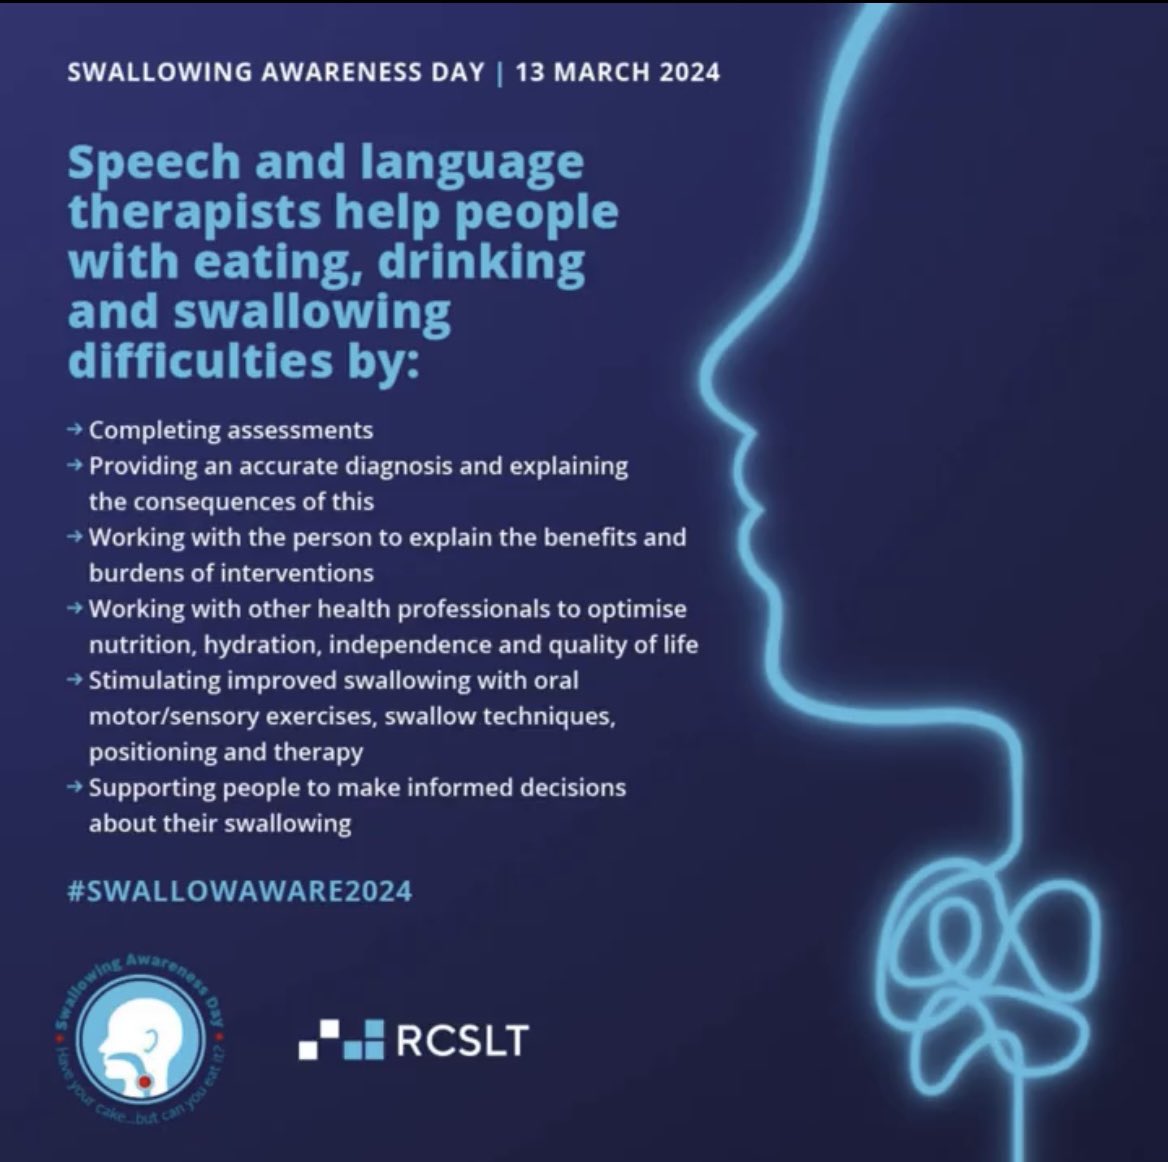 It's Swallow Awareness Day 2024 everyday SLT teams support patients with eating, drinking and swallowing difficulties, dysphagia and other related issues. #SwallowAware2024